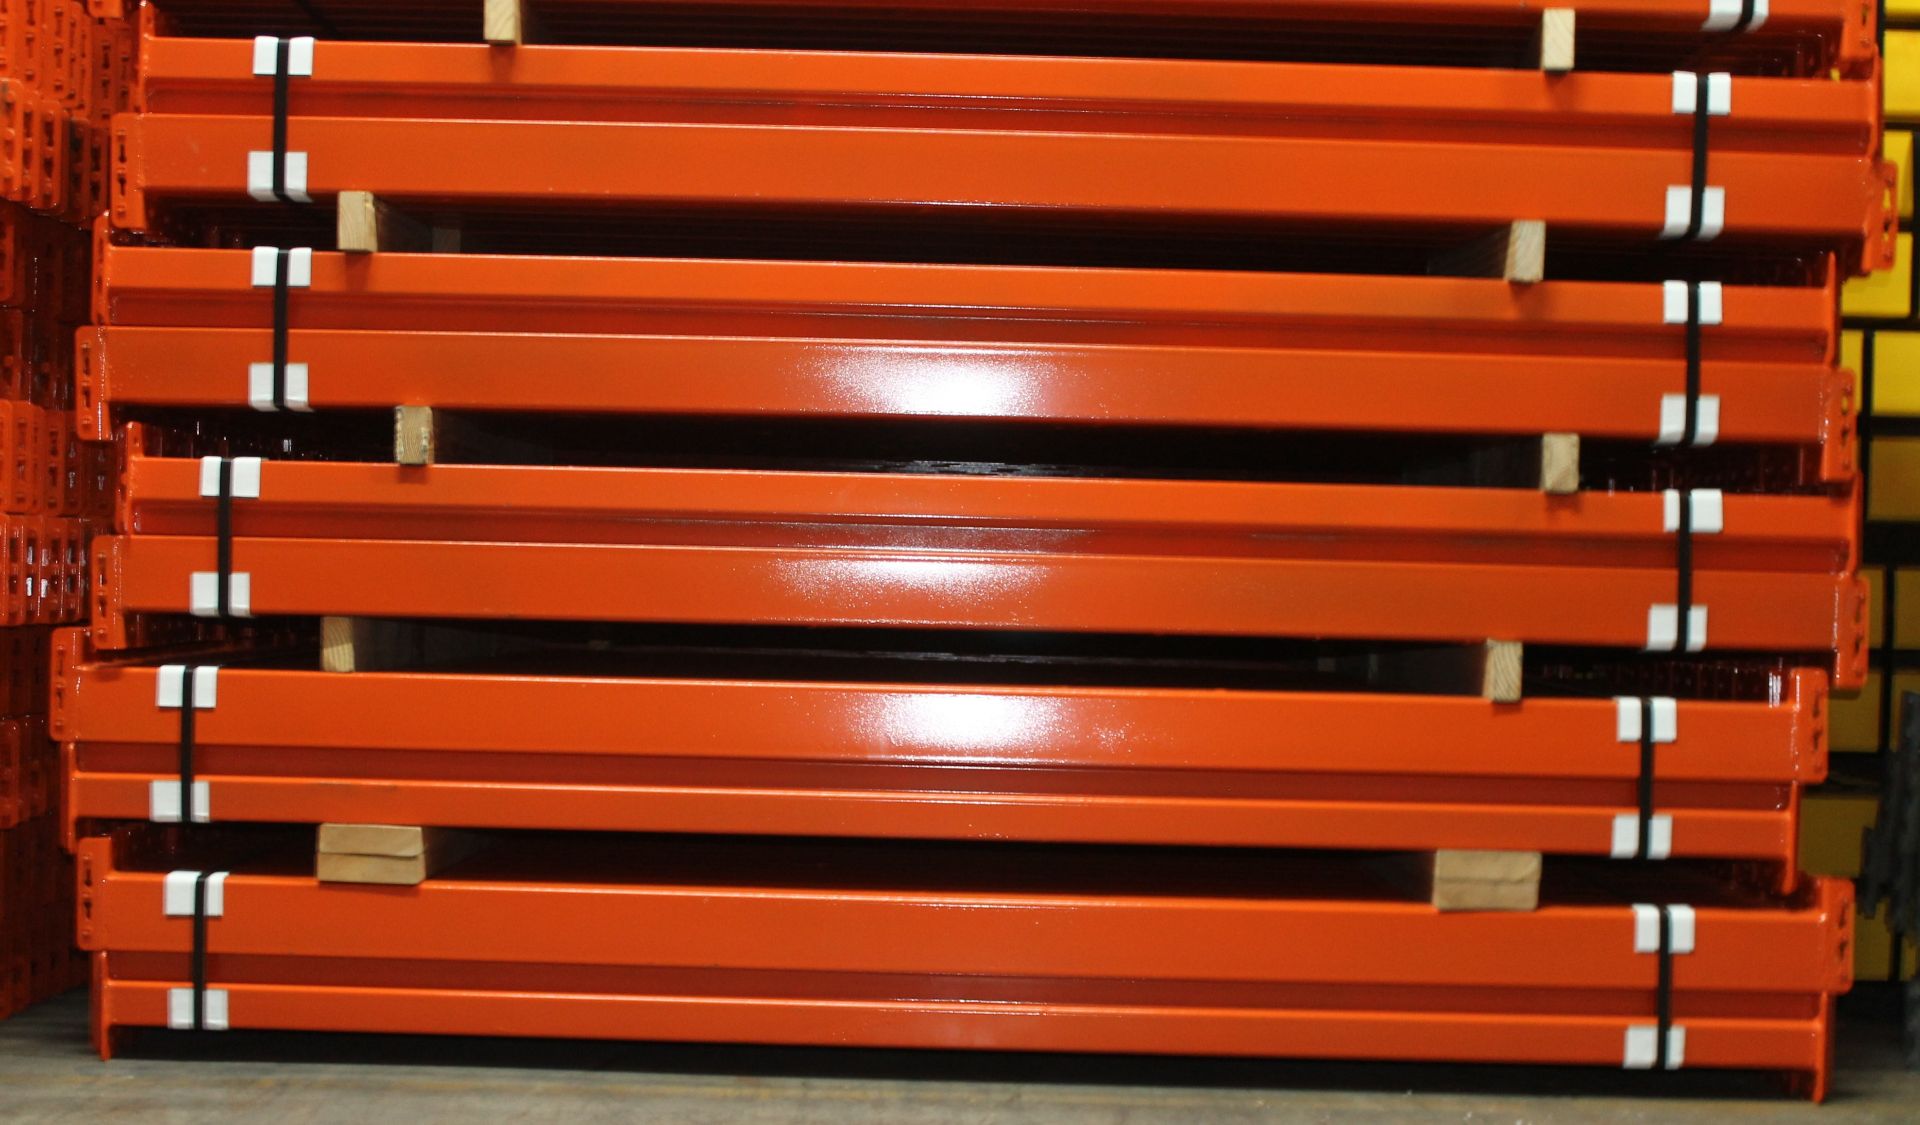 LIKE NEW TEAR DROP STYLE PALLET RACK WITH WIRE DECKING. SIZE:  144"H X 96"L X 42"D, FULL TRUCK LOAD - Image 3 of 6